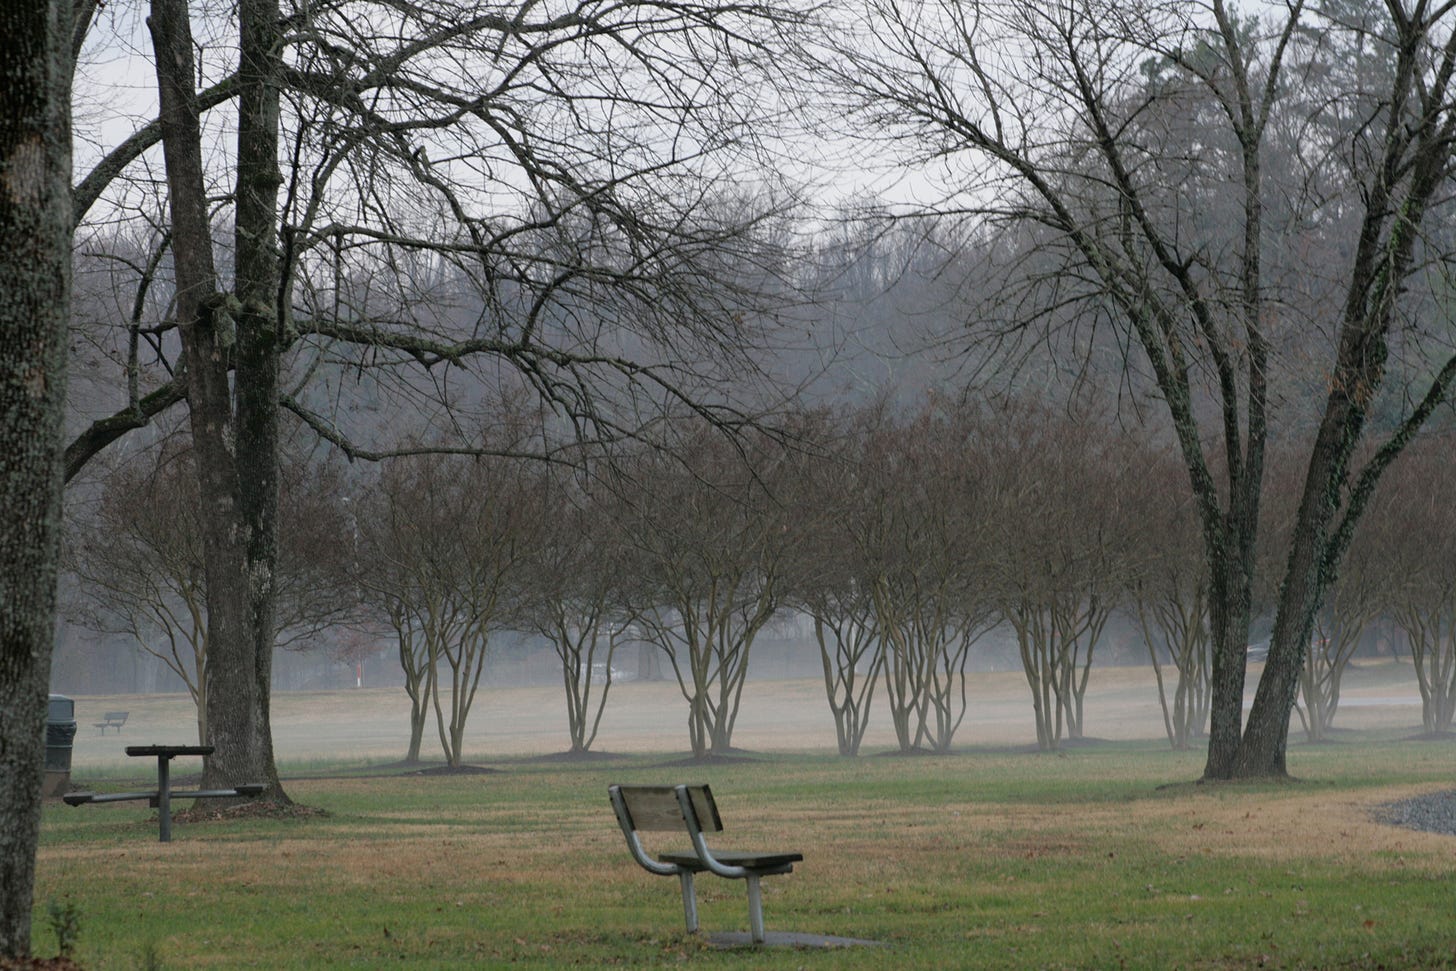 A lone park bench in the middle of a foggy arboretum.